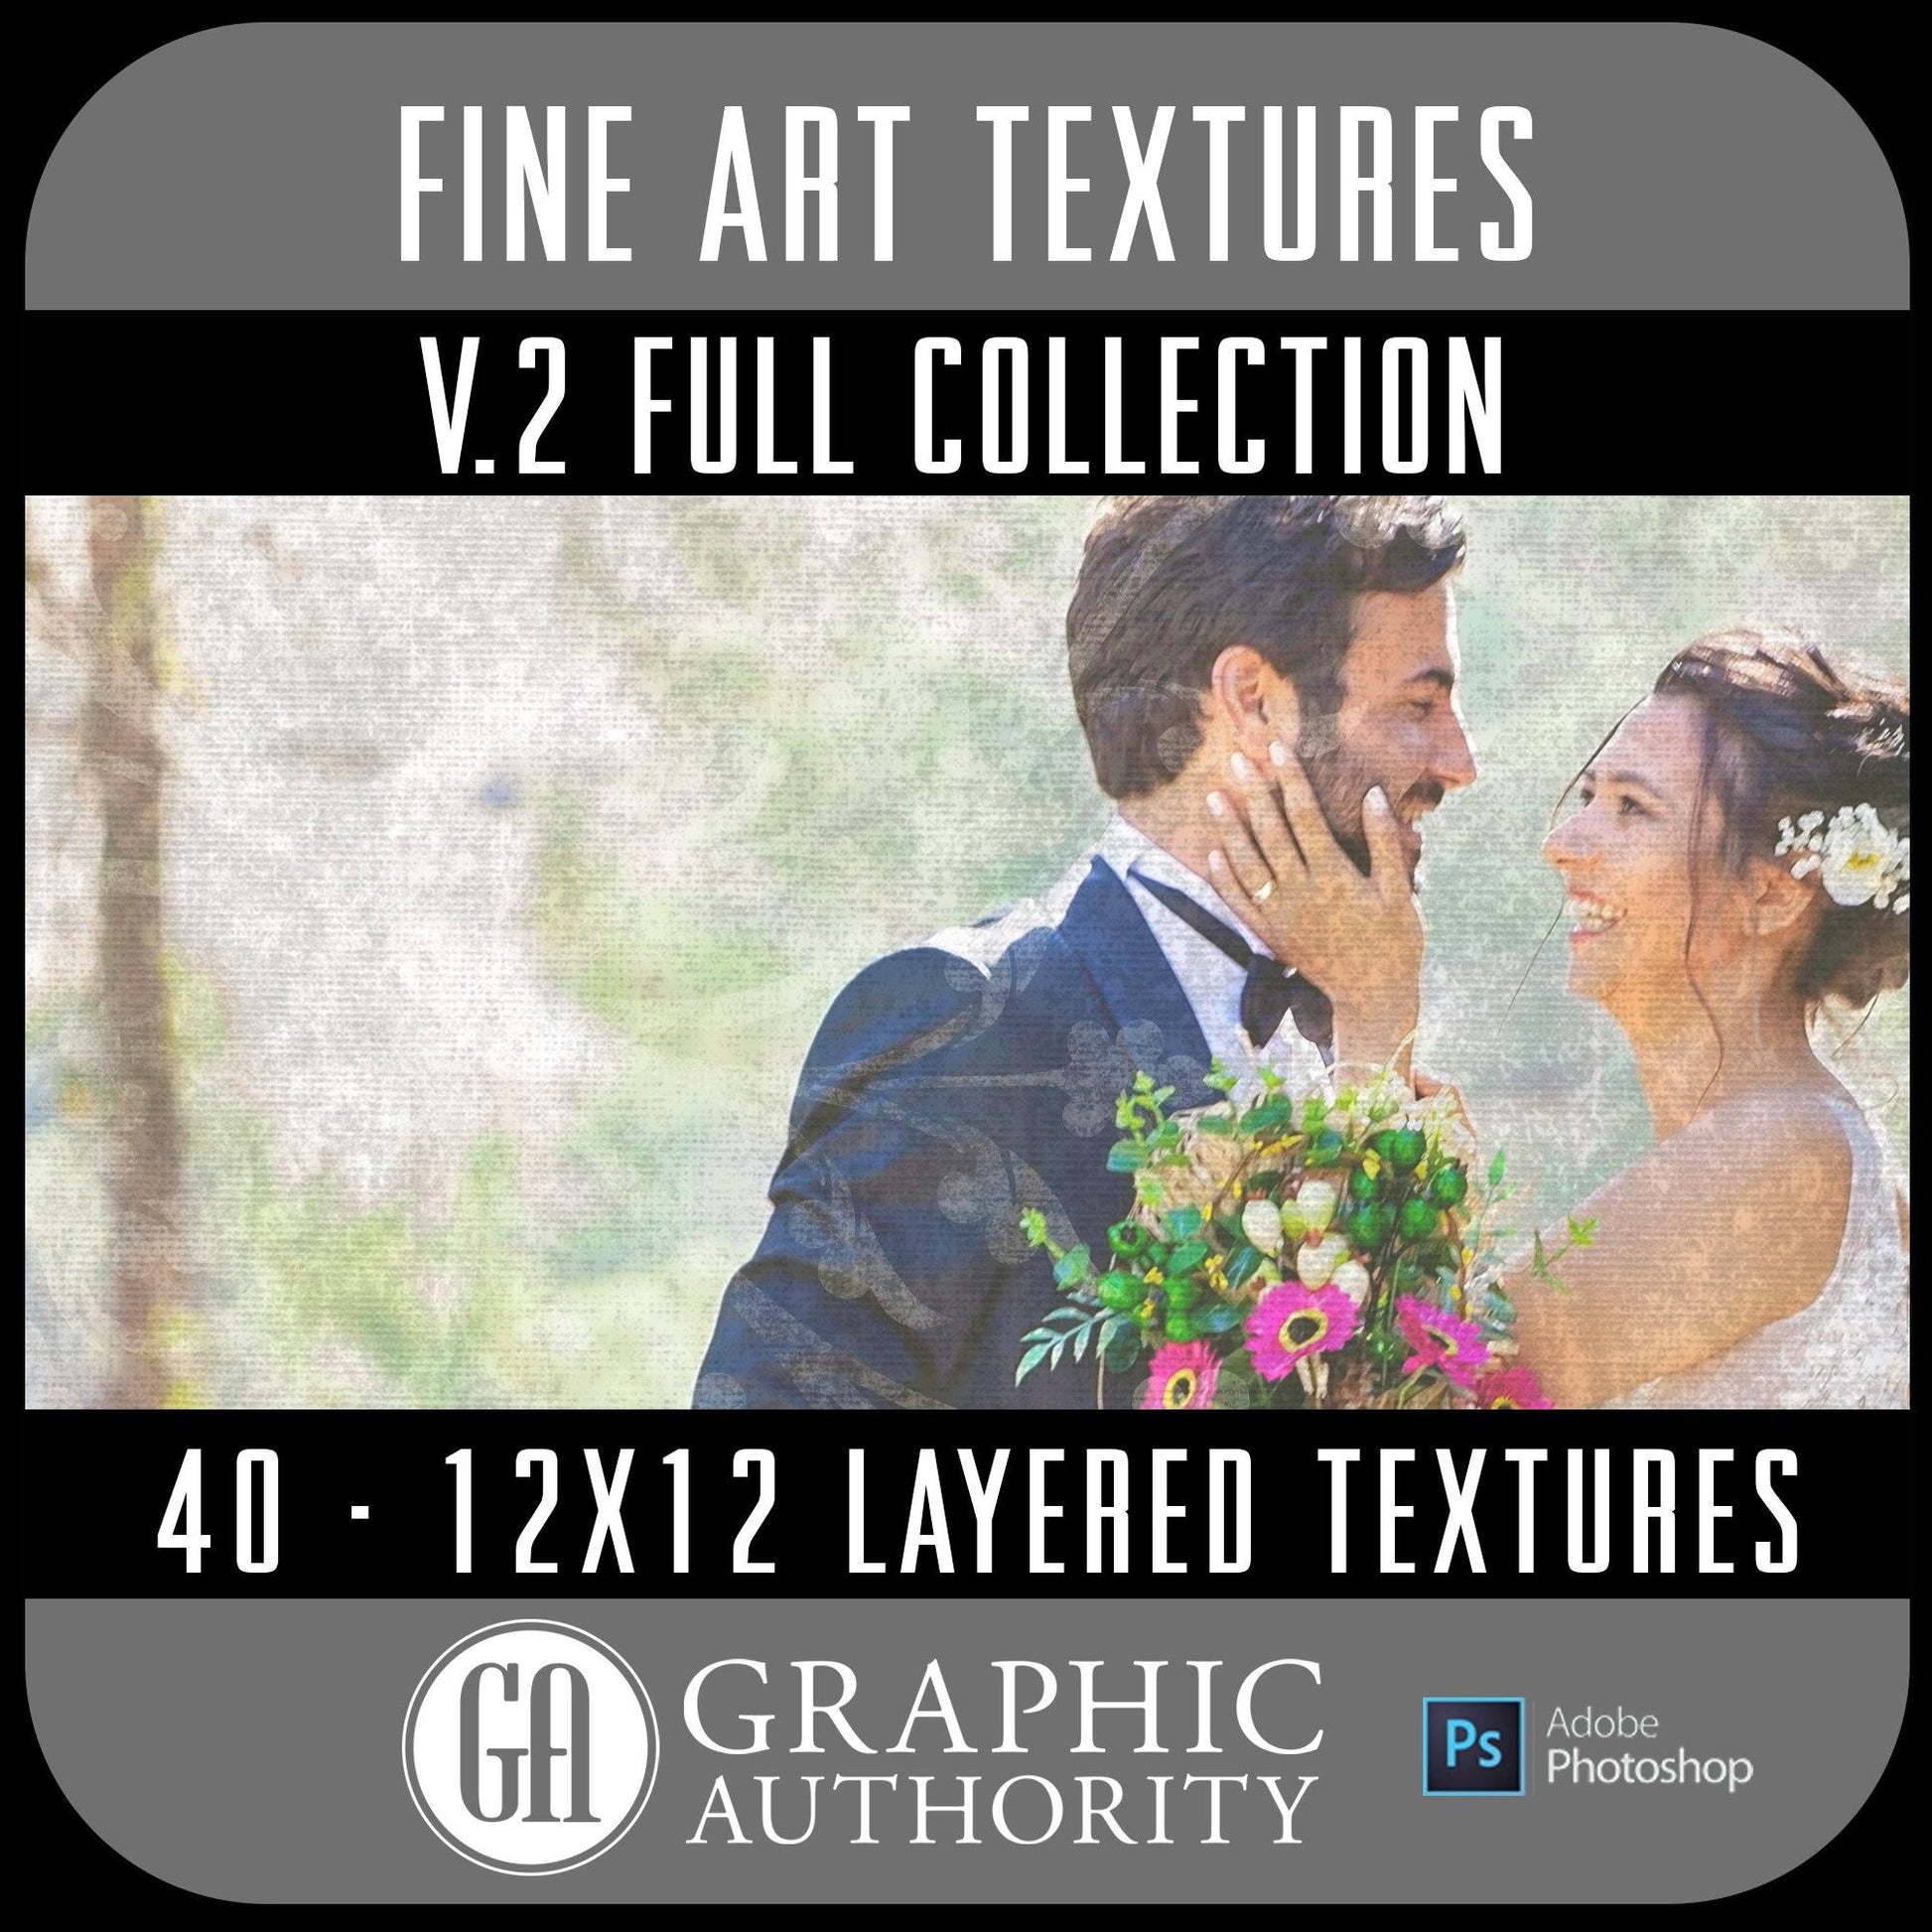 Fine Art V.2 - 12x12 Layered Textures - Full Collection-Photoshop Template - Graphic Authority